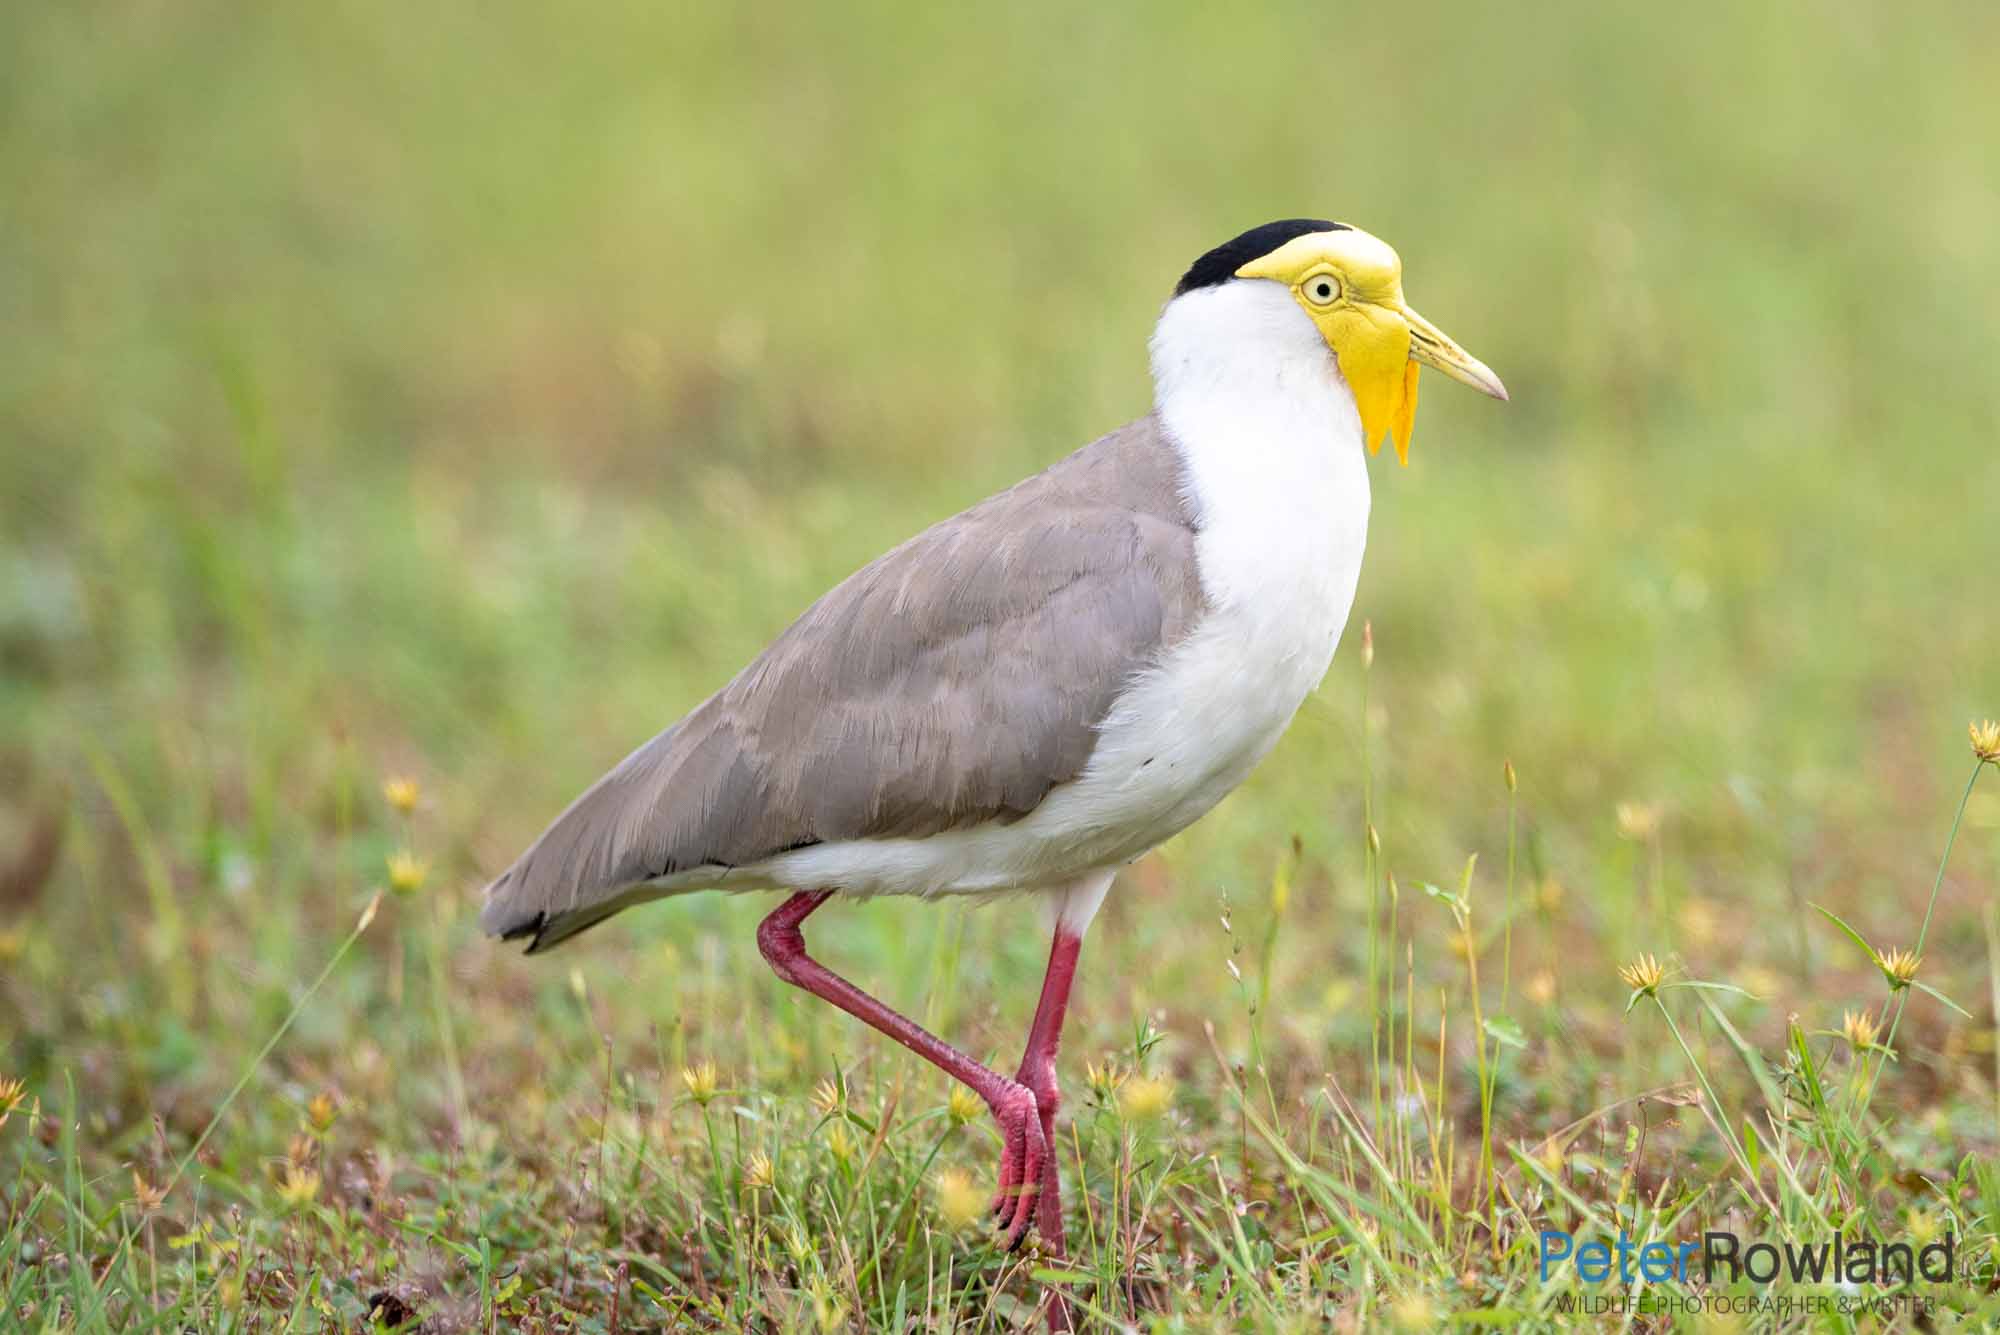 A Masked Lapwing (northern subspecies) walking through a low open grassland. [Photographed by Peter Rowland]